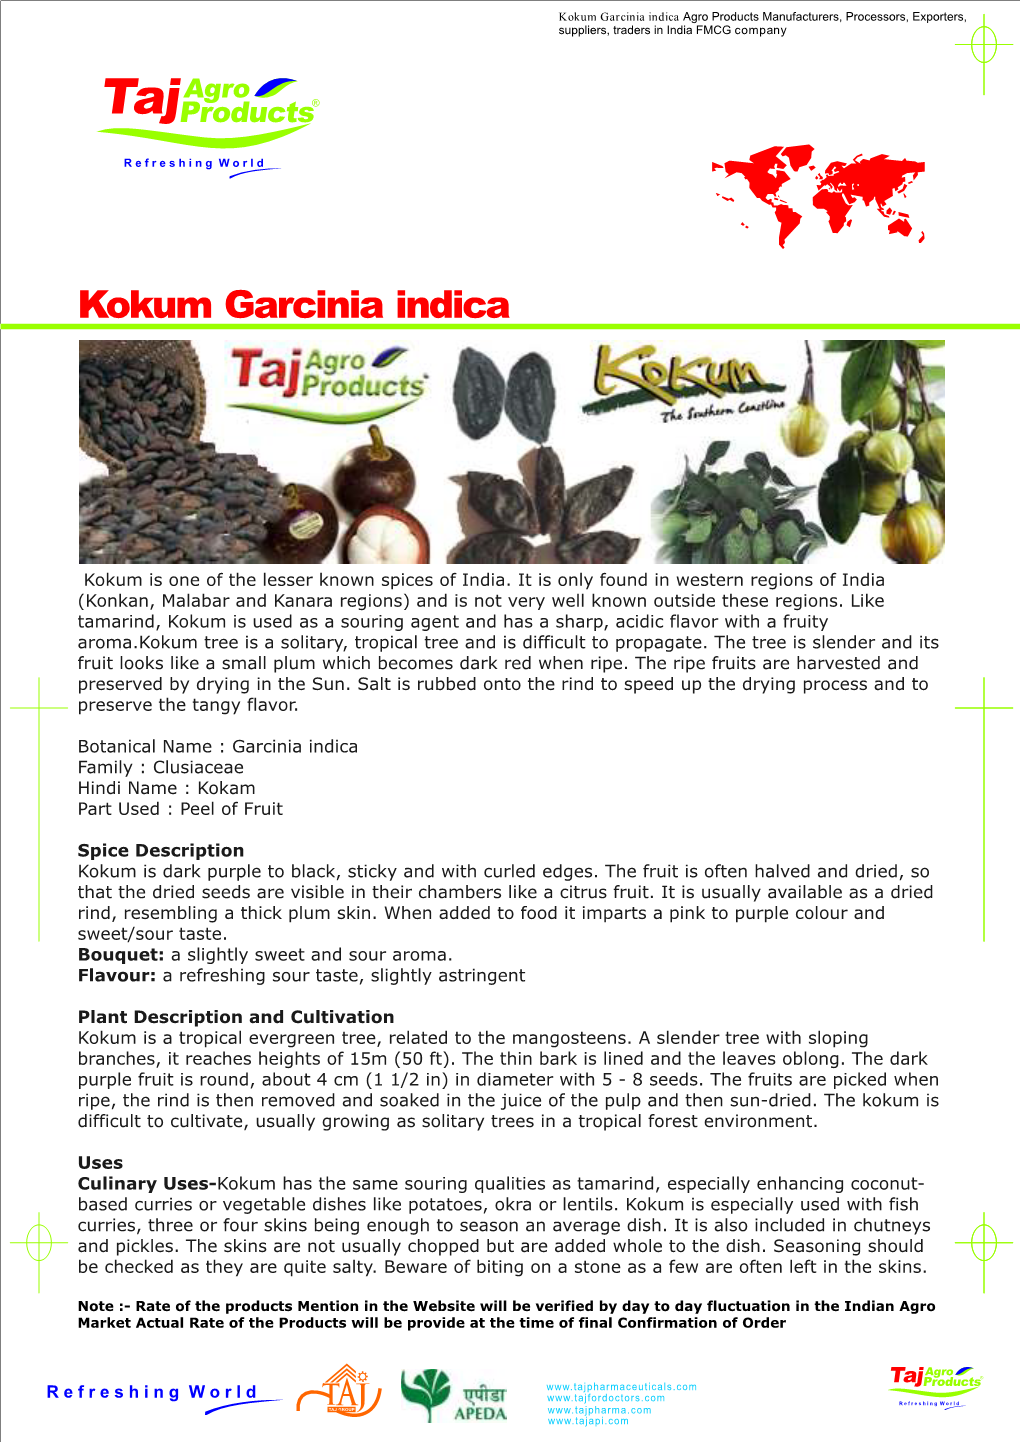 Kokum Garcinia Indica Agro Products Manufacturers, Processors, Exporters, Suppliers, Traders in India FMCG Company Taj Agro Products®